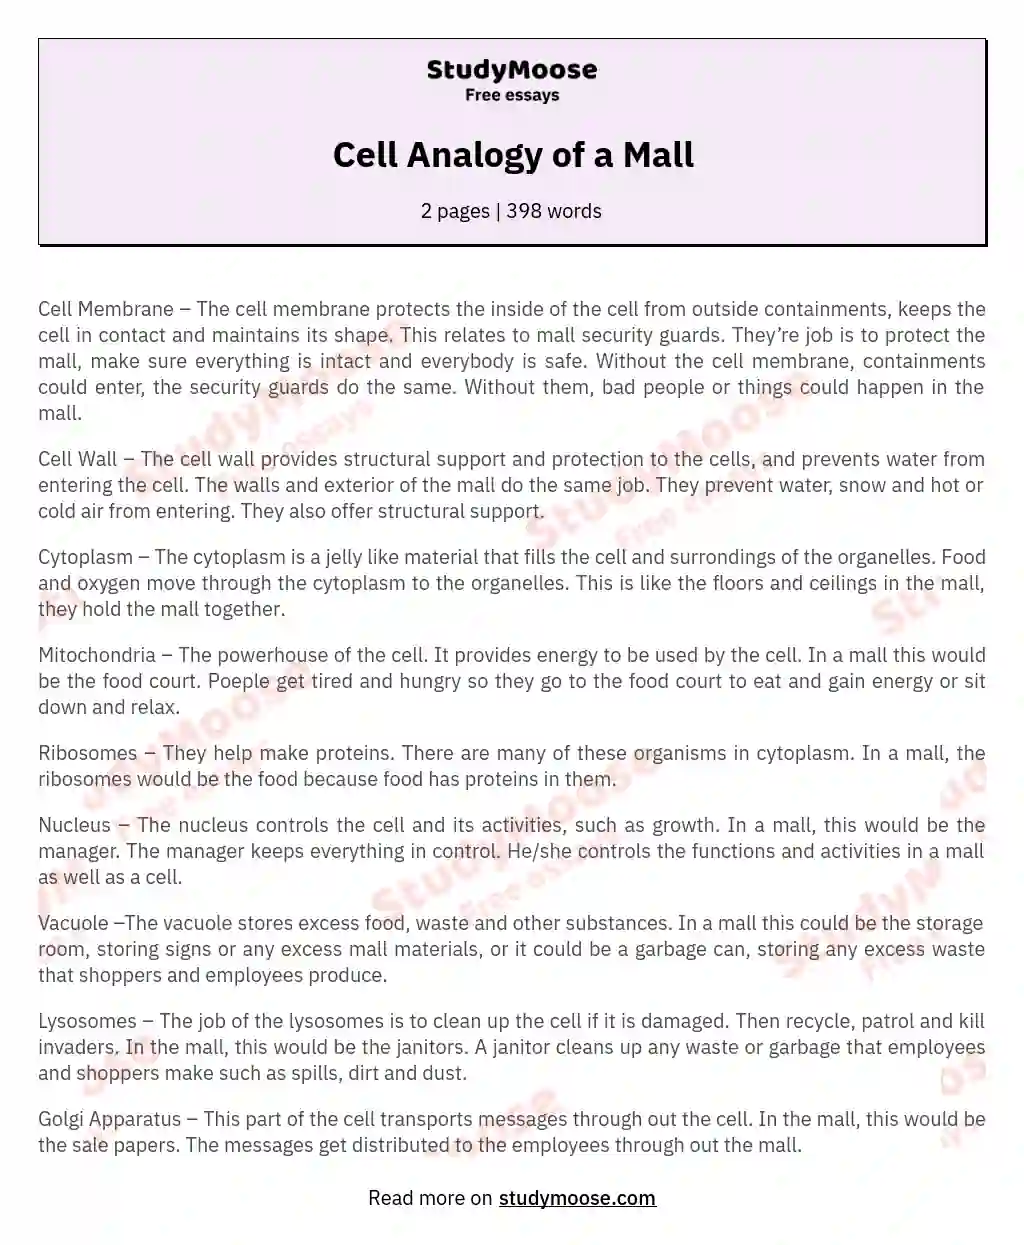 Cell Analogy of a Mall